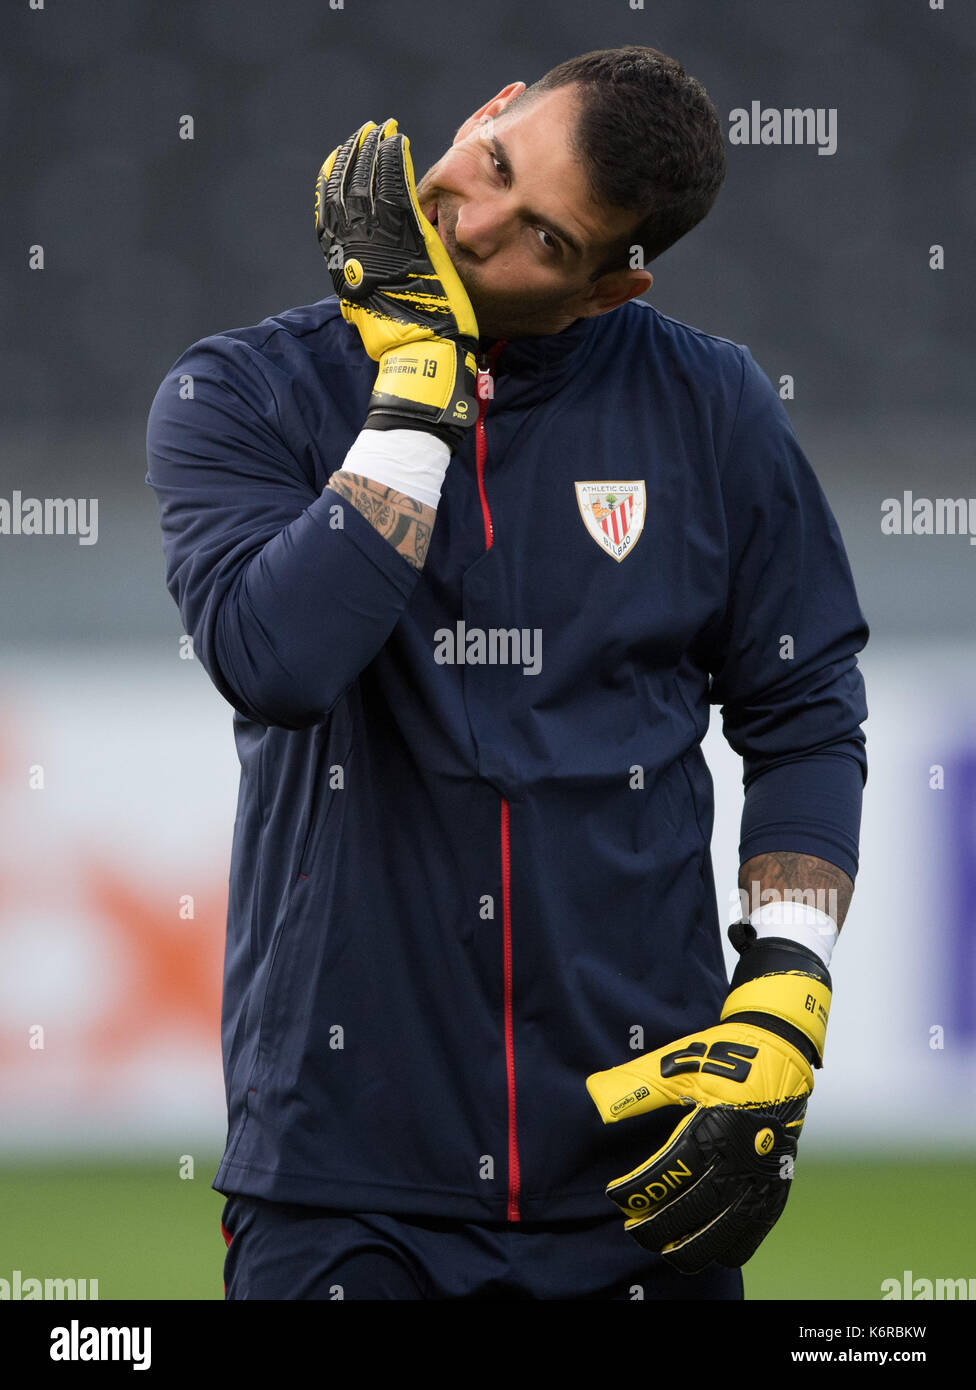 Berlin, Germany. 23rd Sep, 2017. The Bilbao goalkeeper Kepa Arrizabalaga during a training session at the Olympic Stadium in Berlin, Germany, 23 September 2017. Athletic Bilbao will meet with Hertha BSC for a Europa League match on the 14th of September 2017. Photo: Soeren Stache/dpa/Alamy Live News Stock Photo